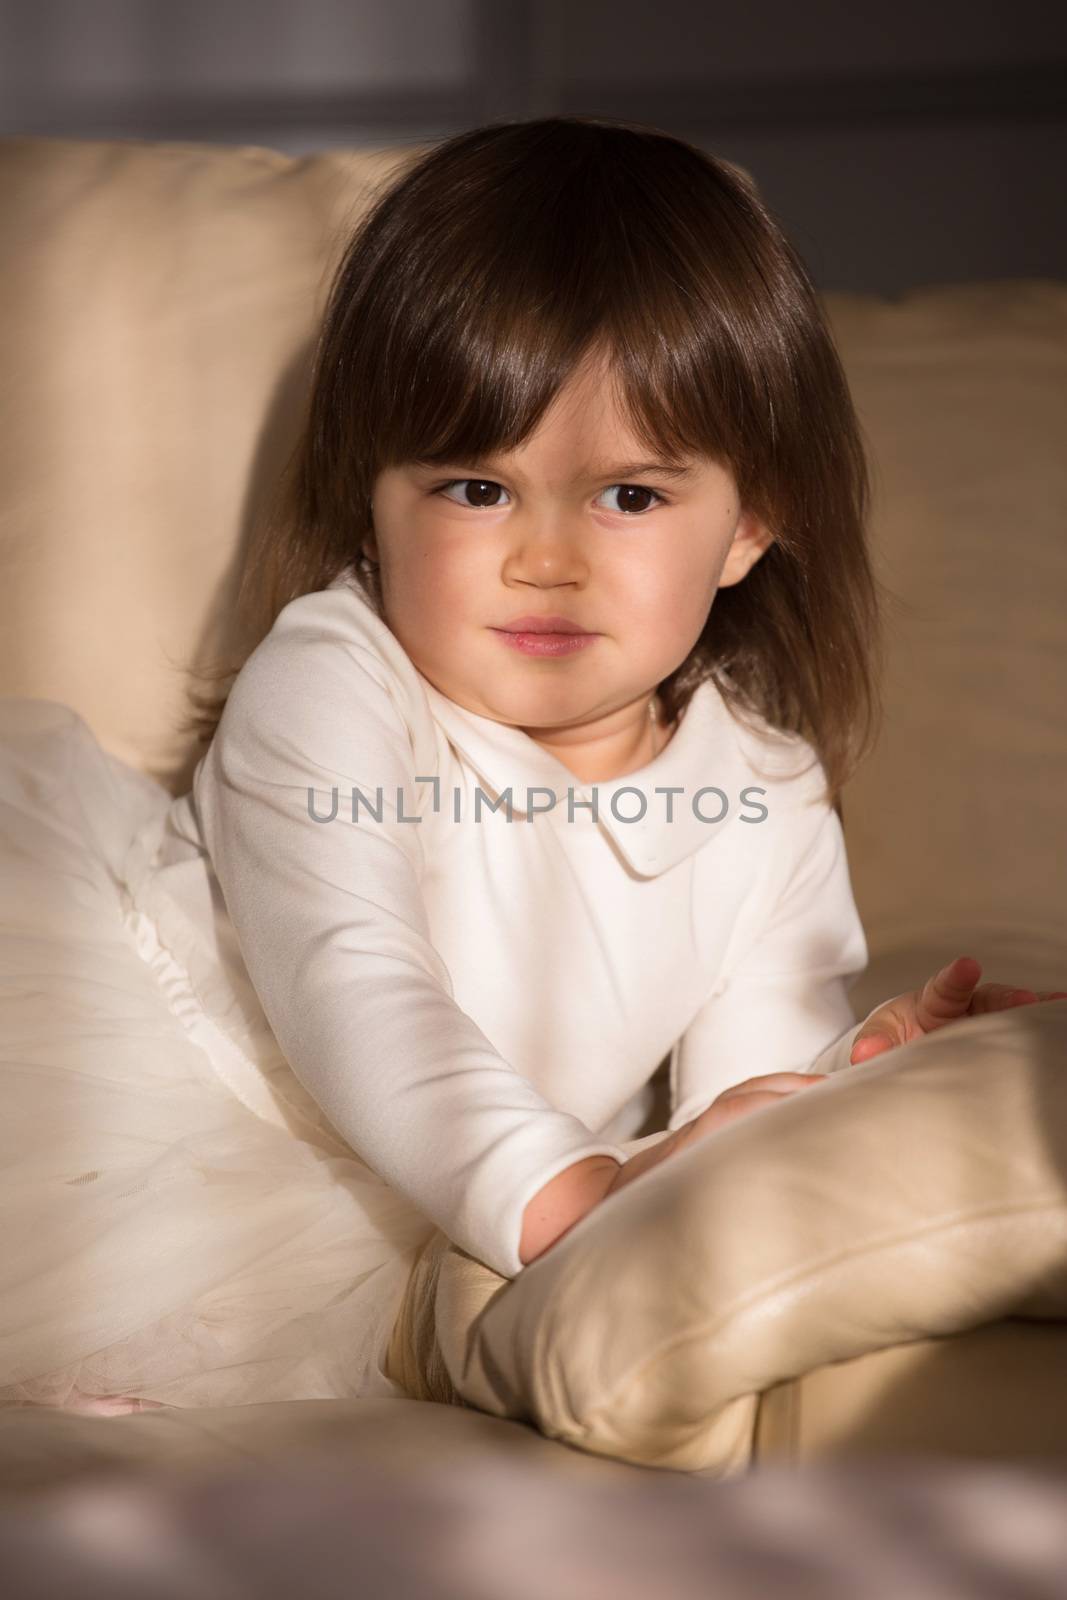 Pretty baby girl with brown hair in white dress